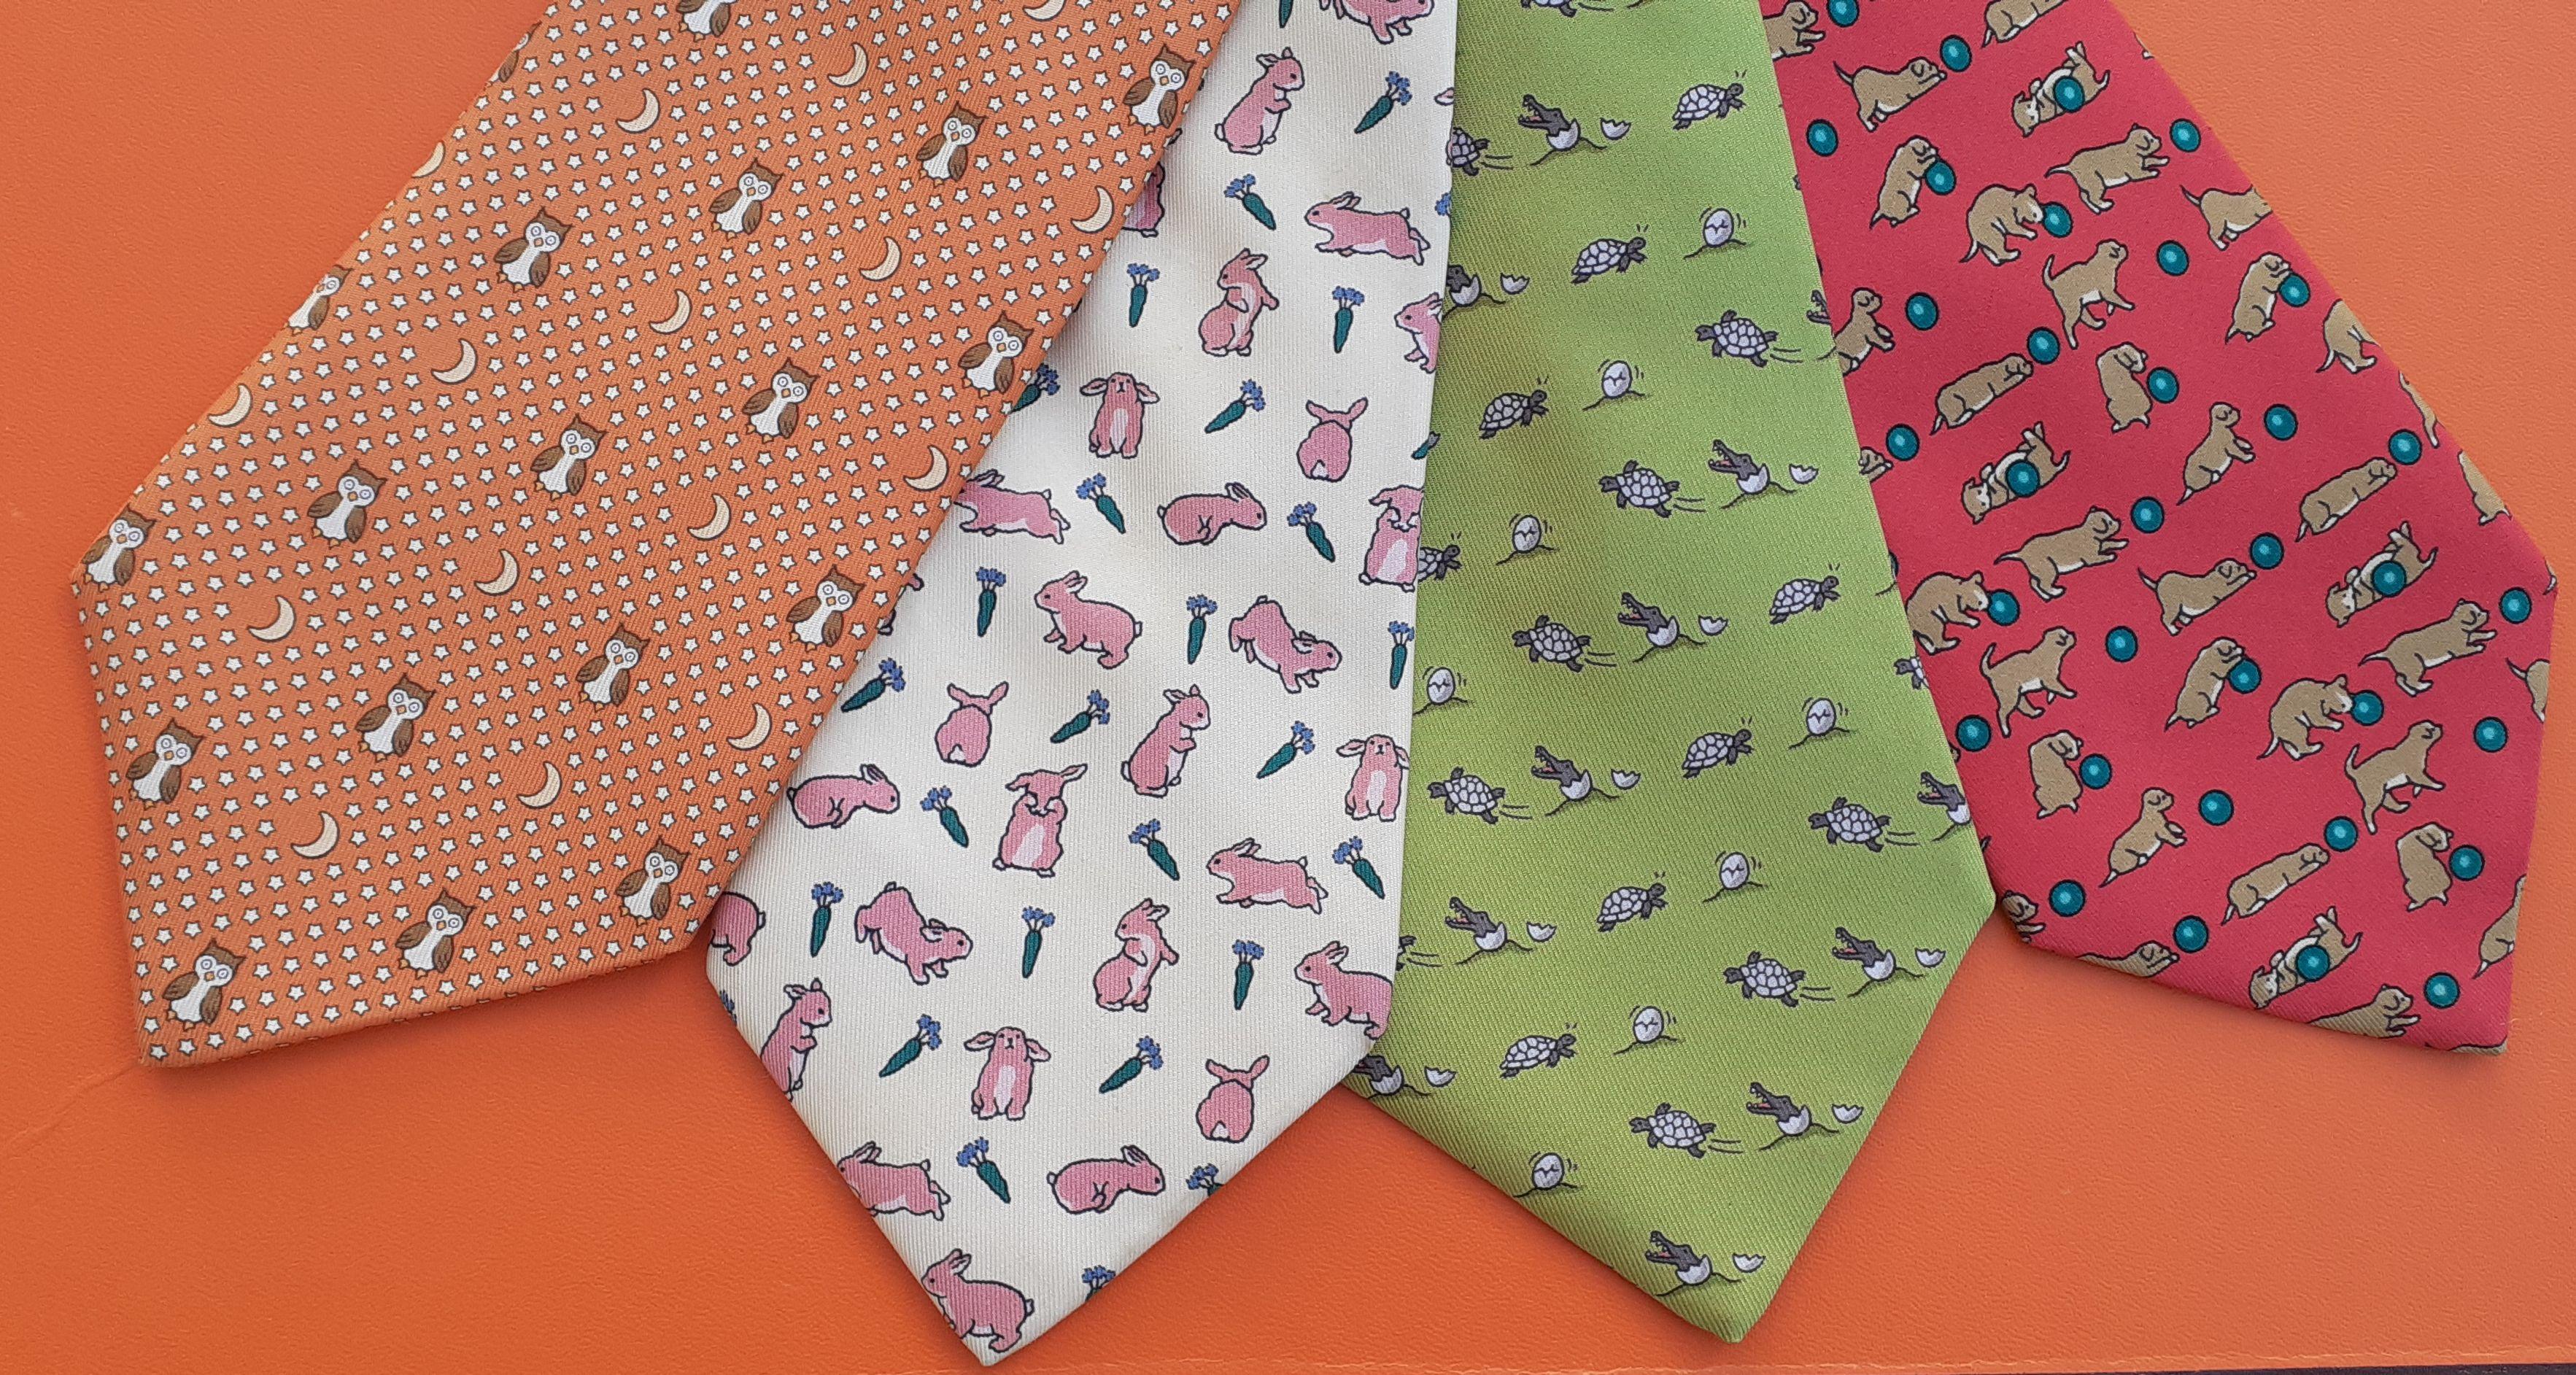 Cute Authentic Hermès Set of 4 Ties

Prints from left to right:

- 7997 EA: owls in a decor of stars and moon / Colorways: Orange, Brown, White, Yellow. Plain orange at back

- 7425 HA: rabbits and carrots / Colorways: Beige, Pink, Green. Plain